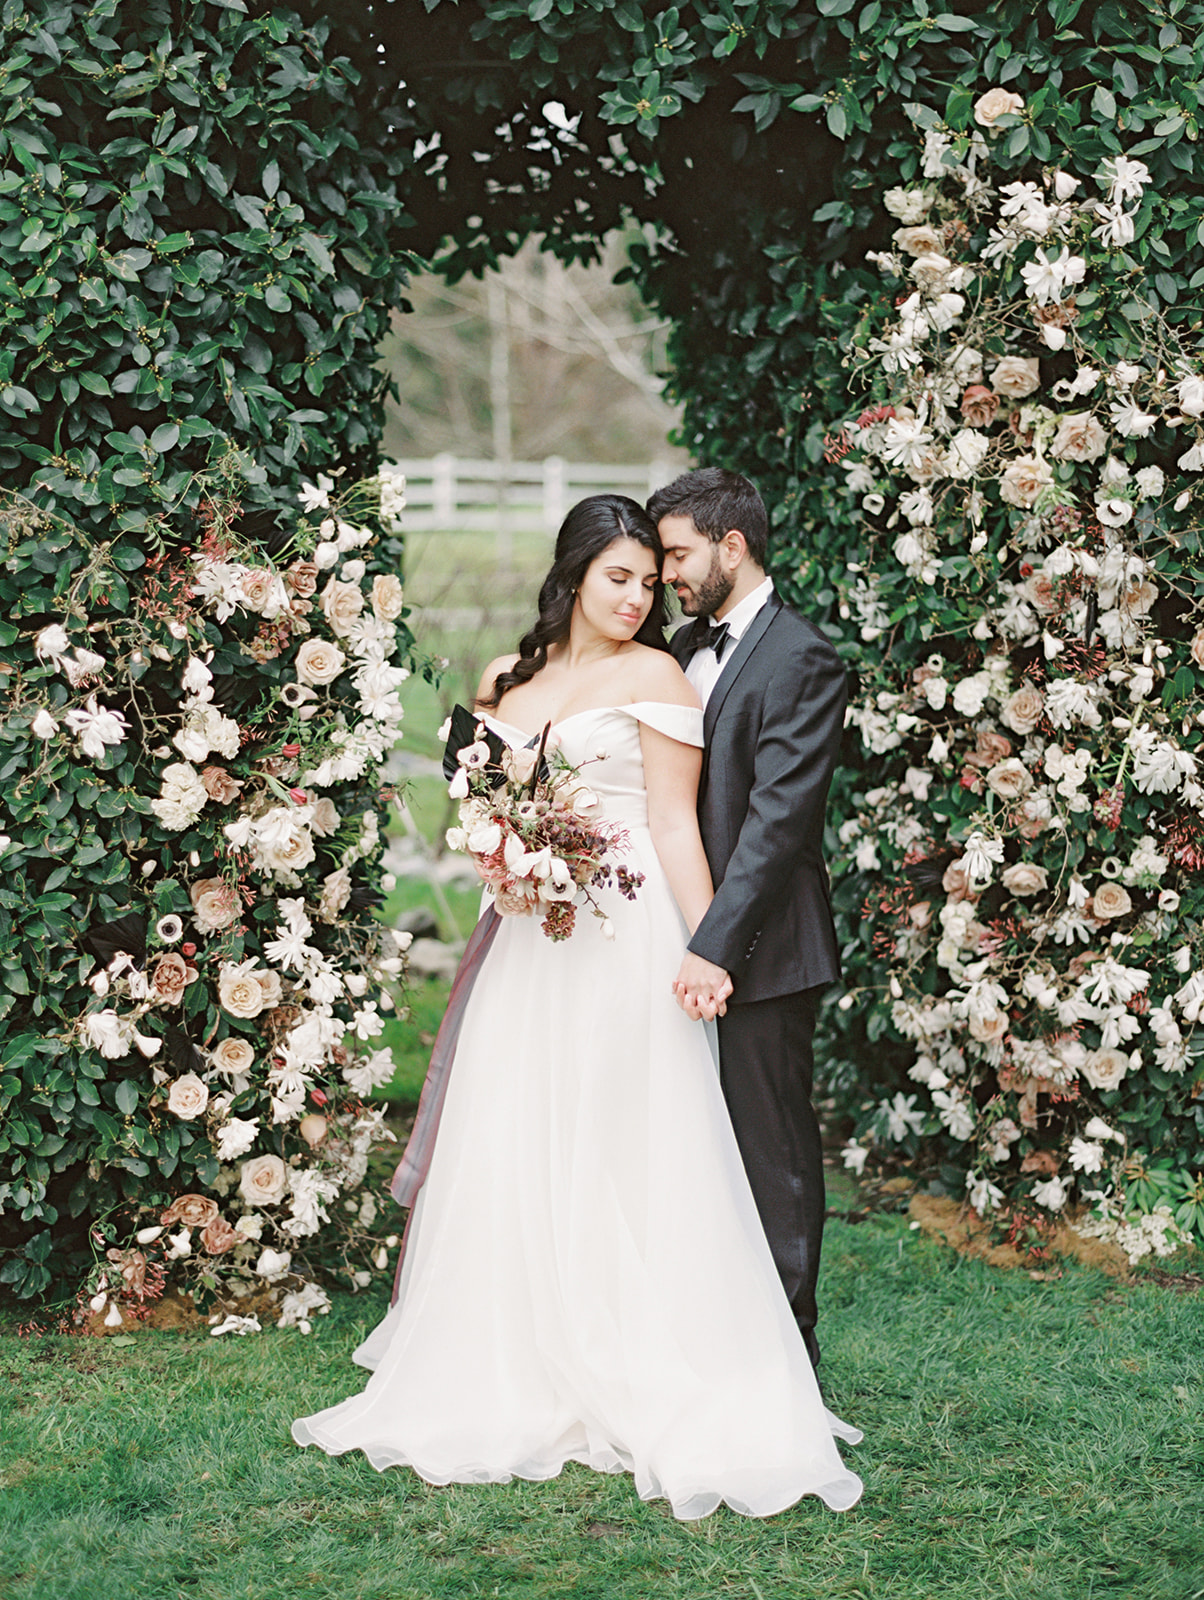 A bride and groom embracing in front of a floral arch installation in the garden hedge at Chateau Lill